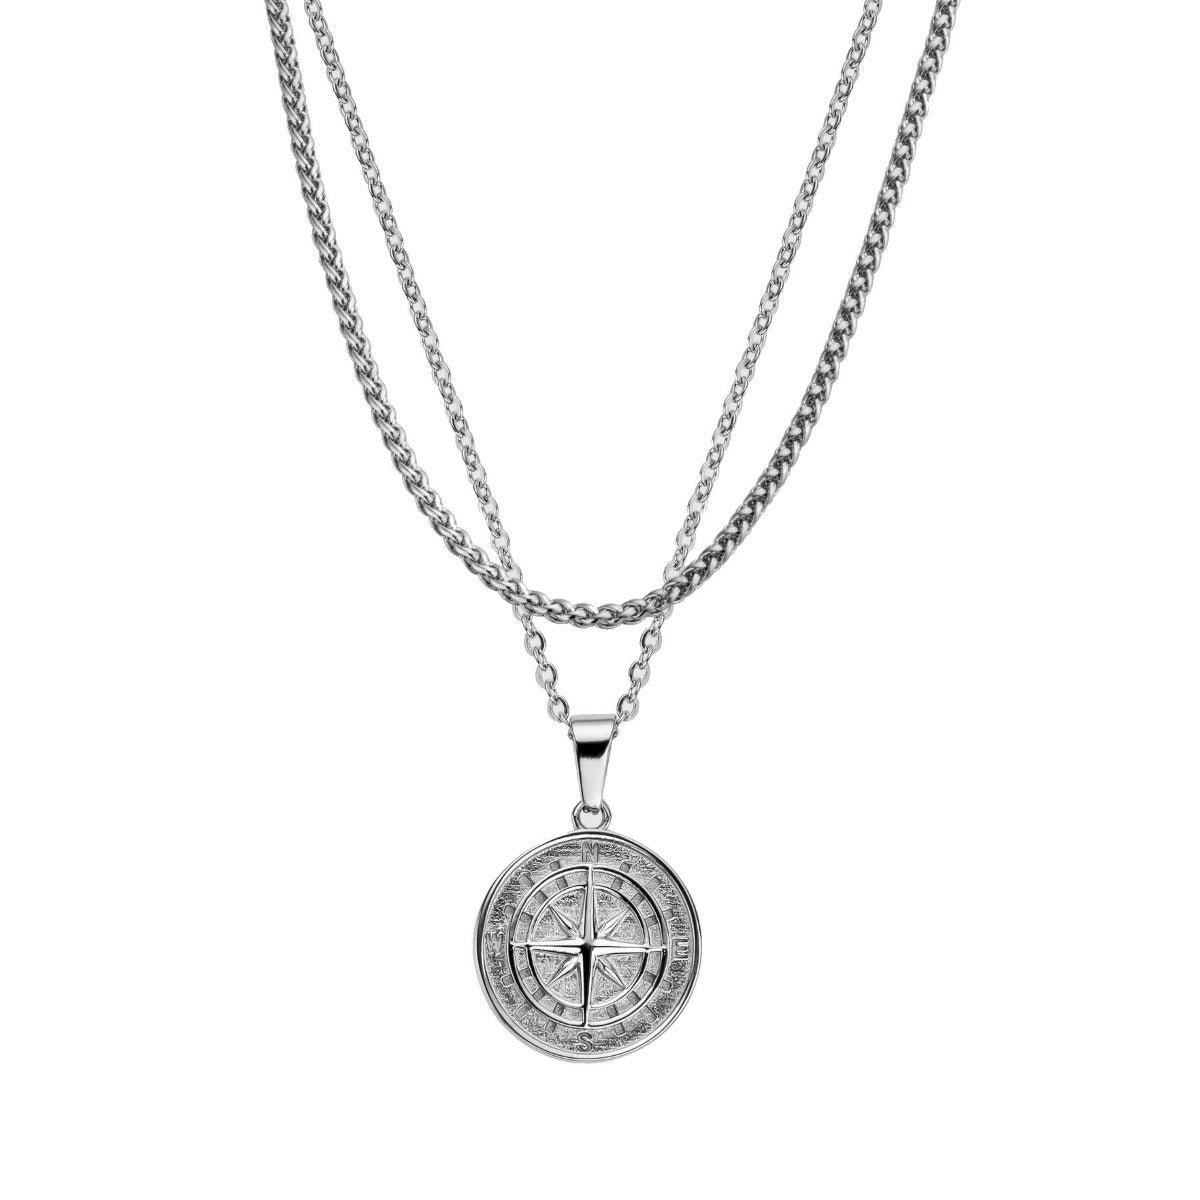 Compass Necklace - CALITHE